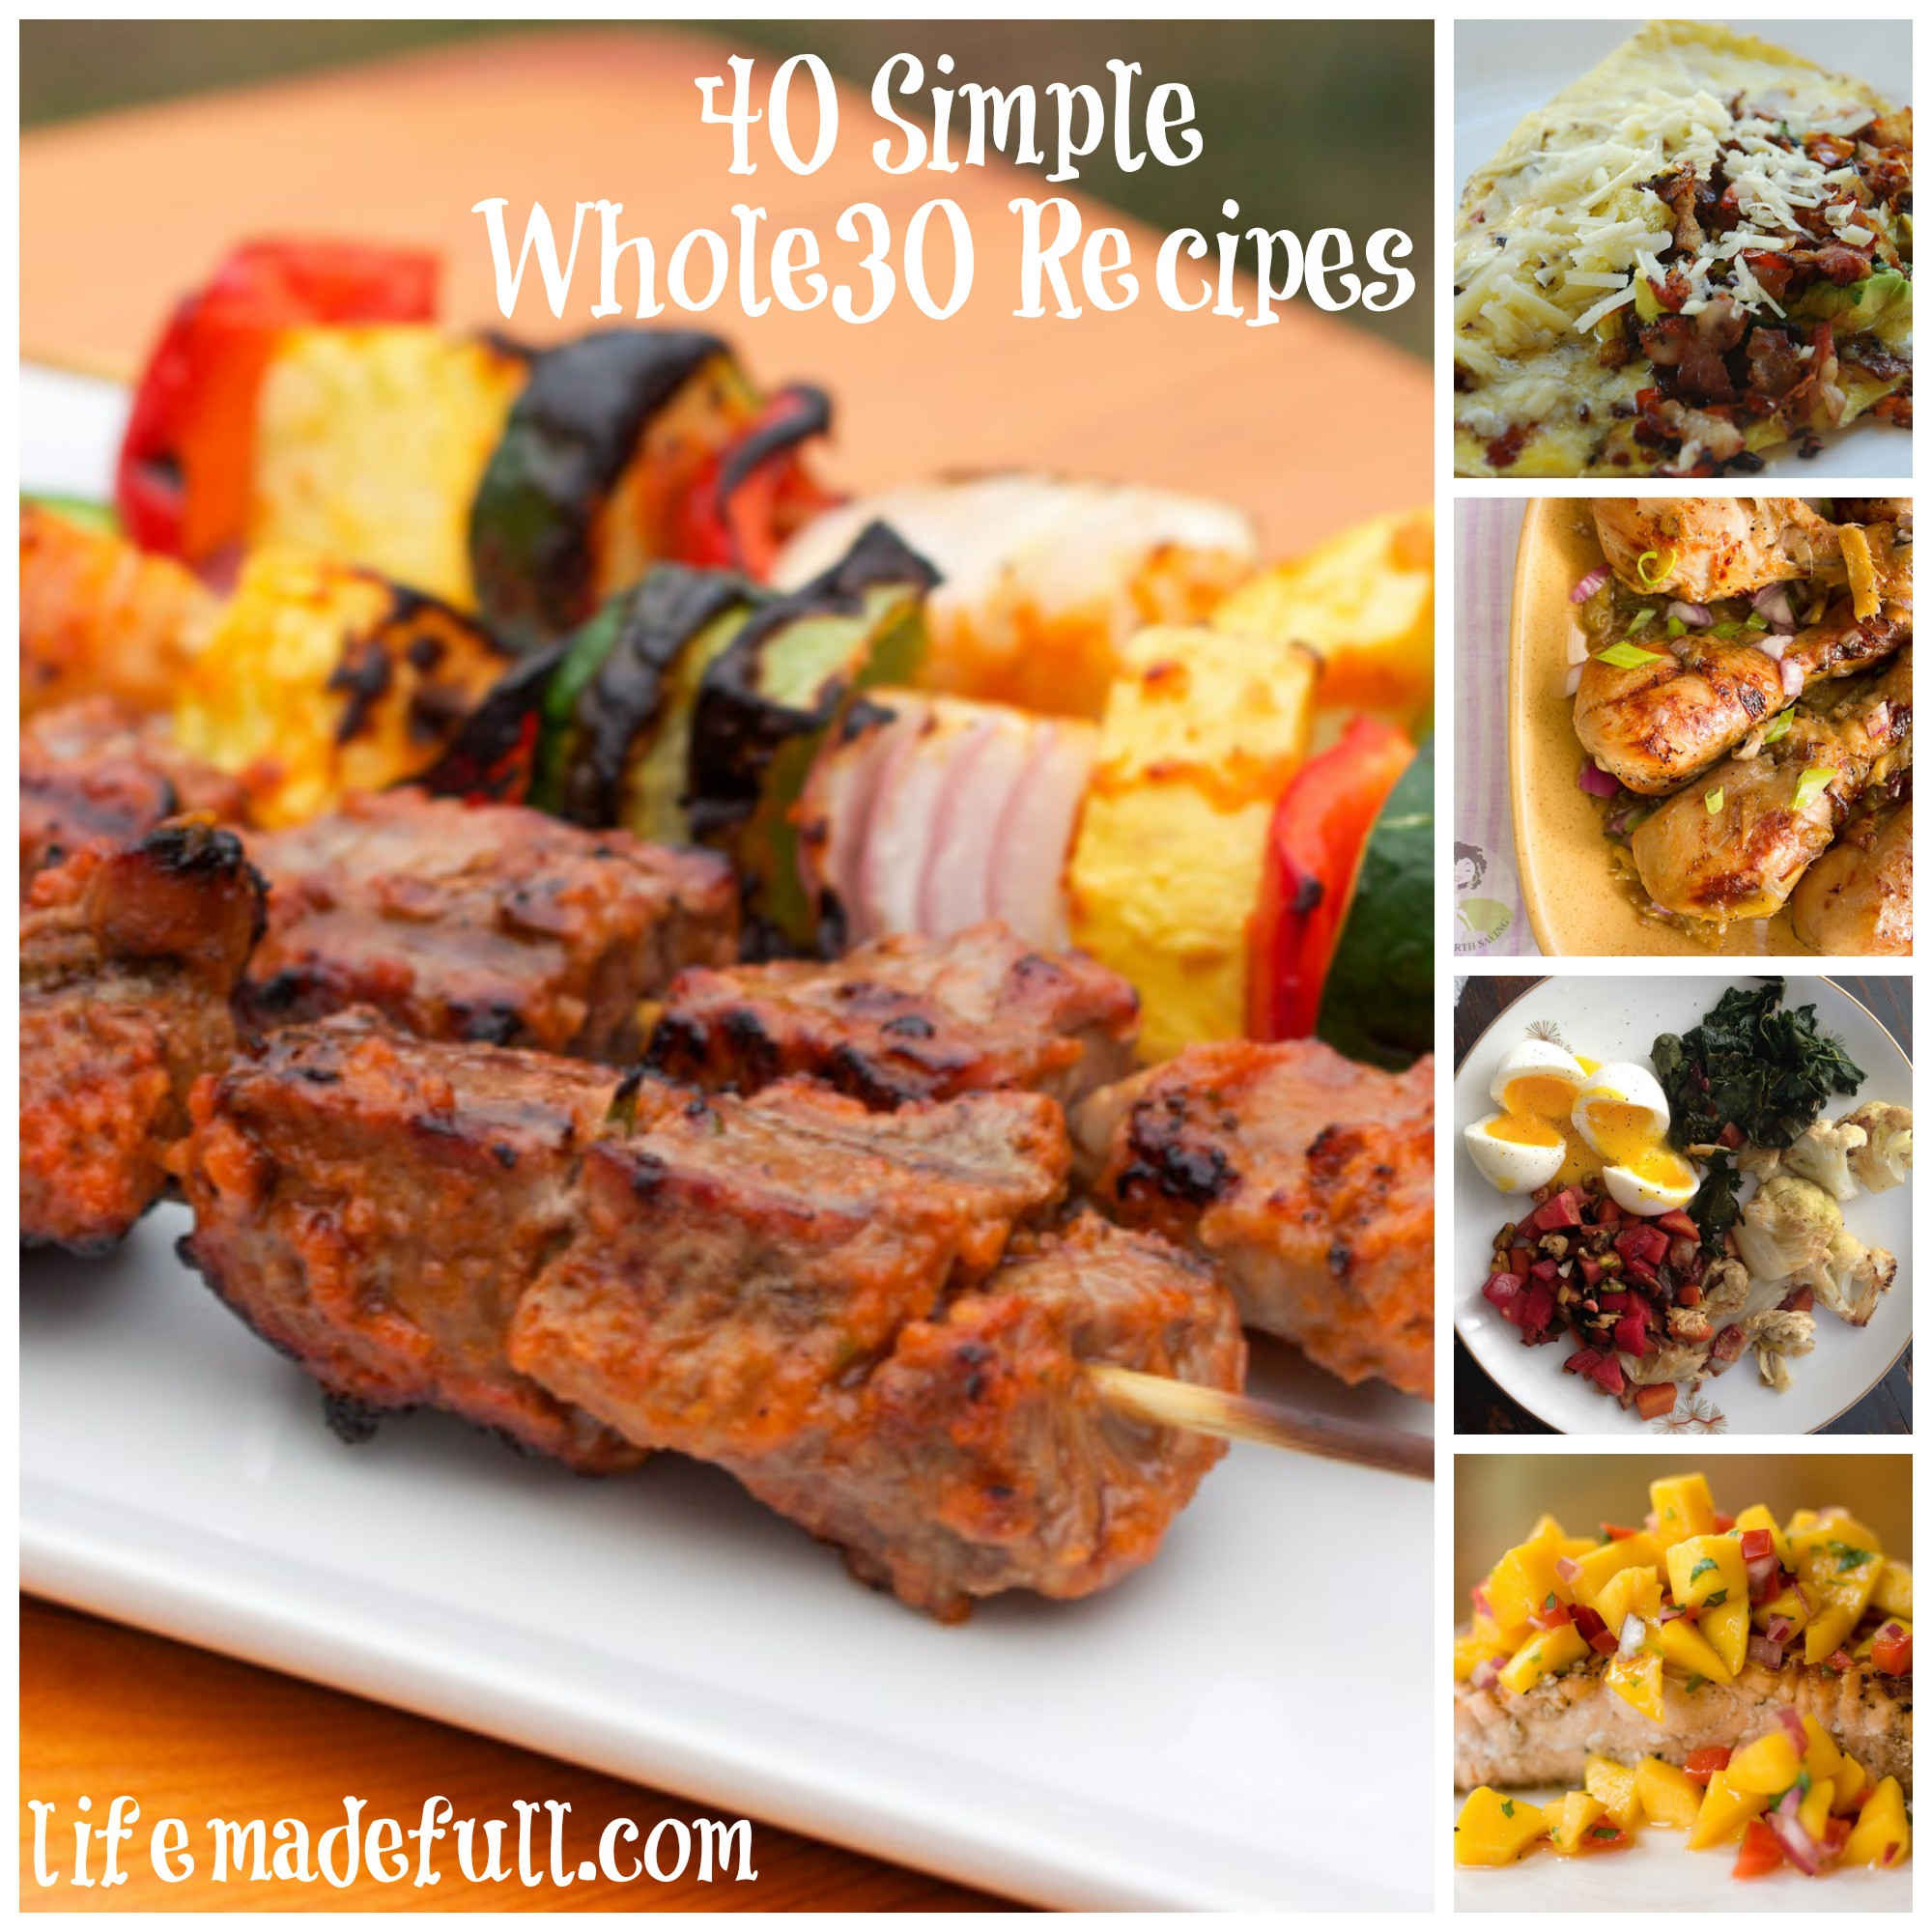 Whole 30 Dinner Recipes
 40 Simple Whole30 Recipes Life Made Full